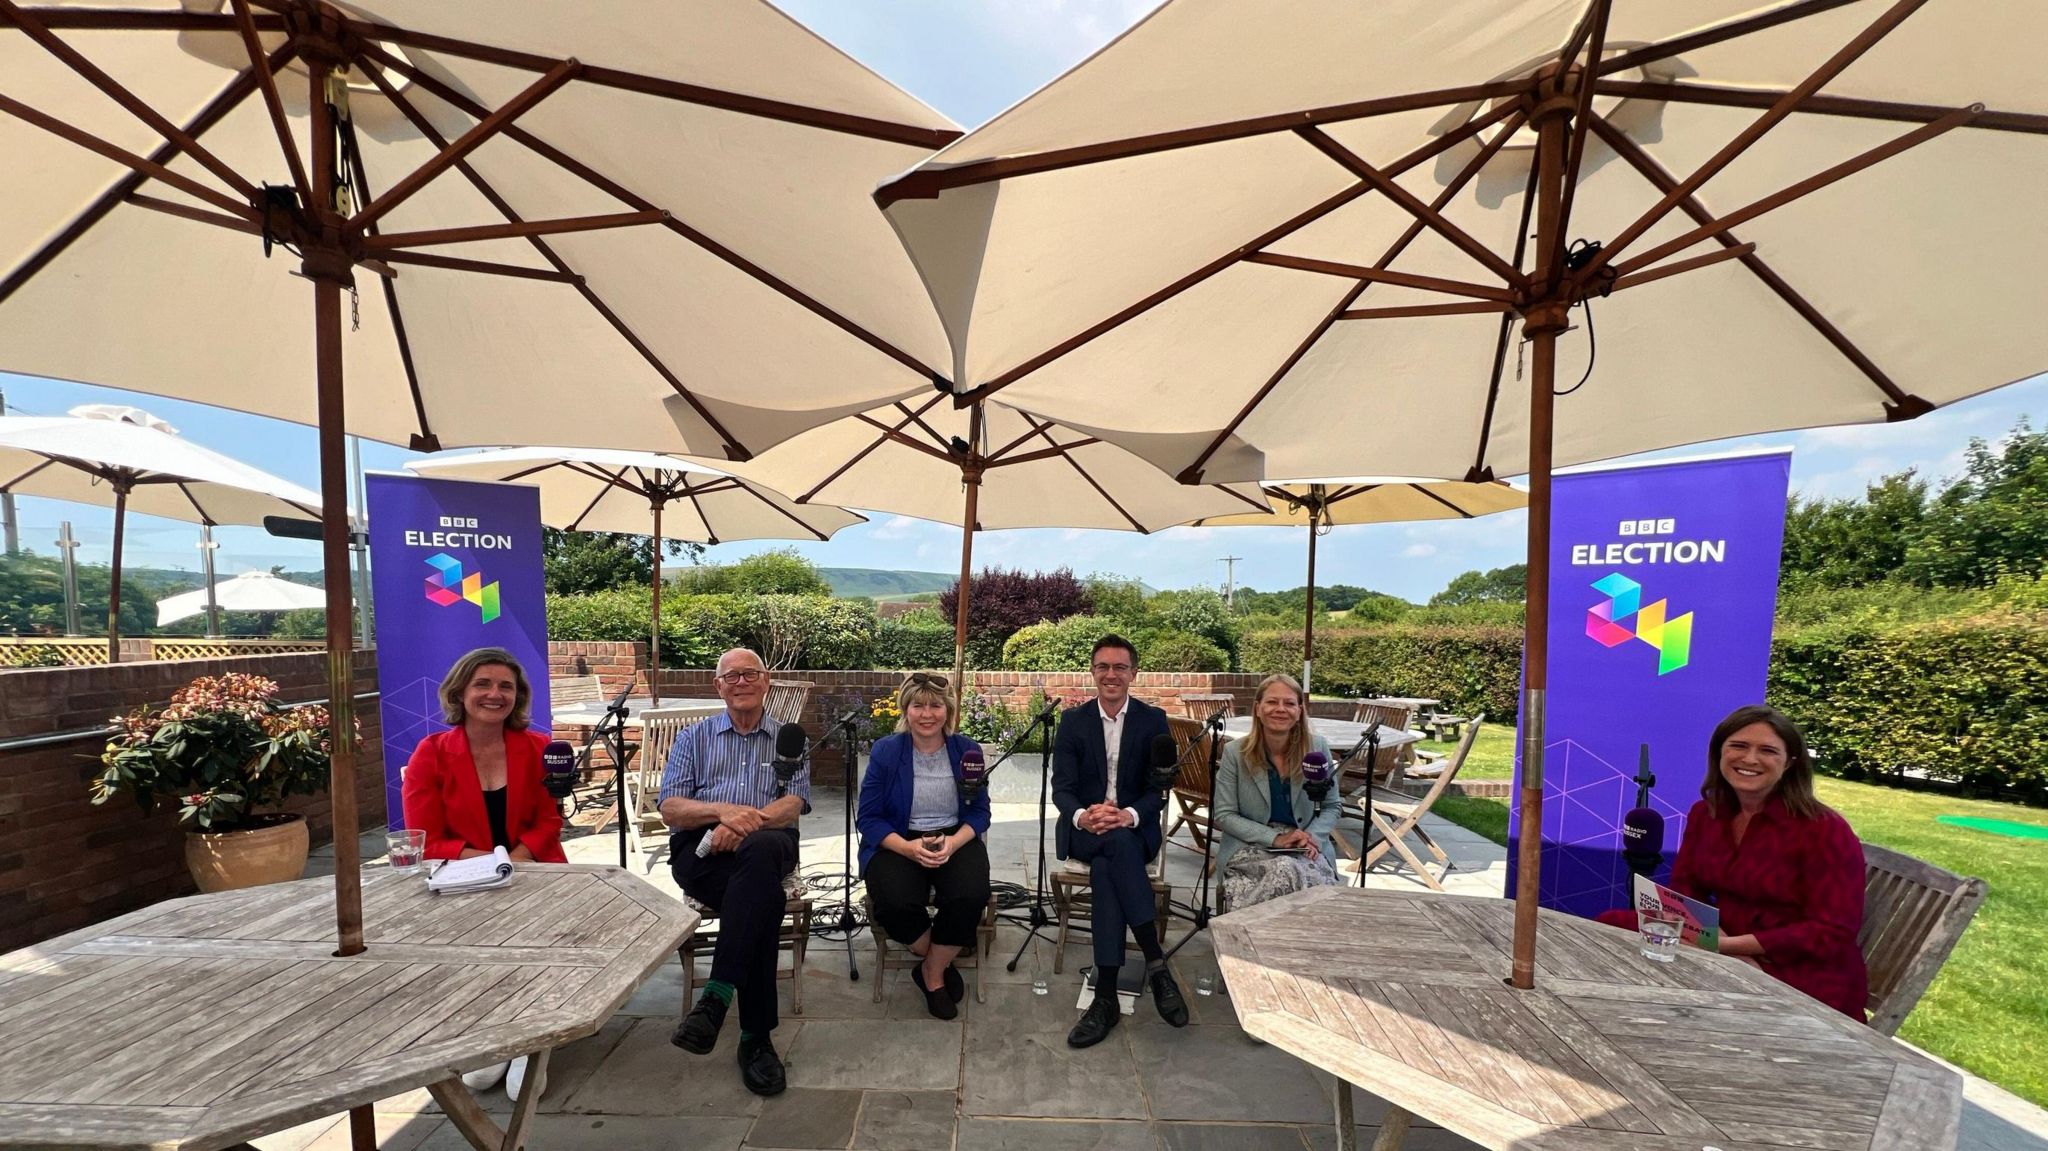 Five political candidates and the BBC's Sussex political reporter in a pub garden